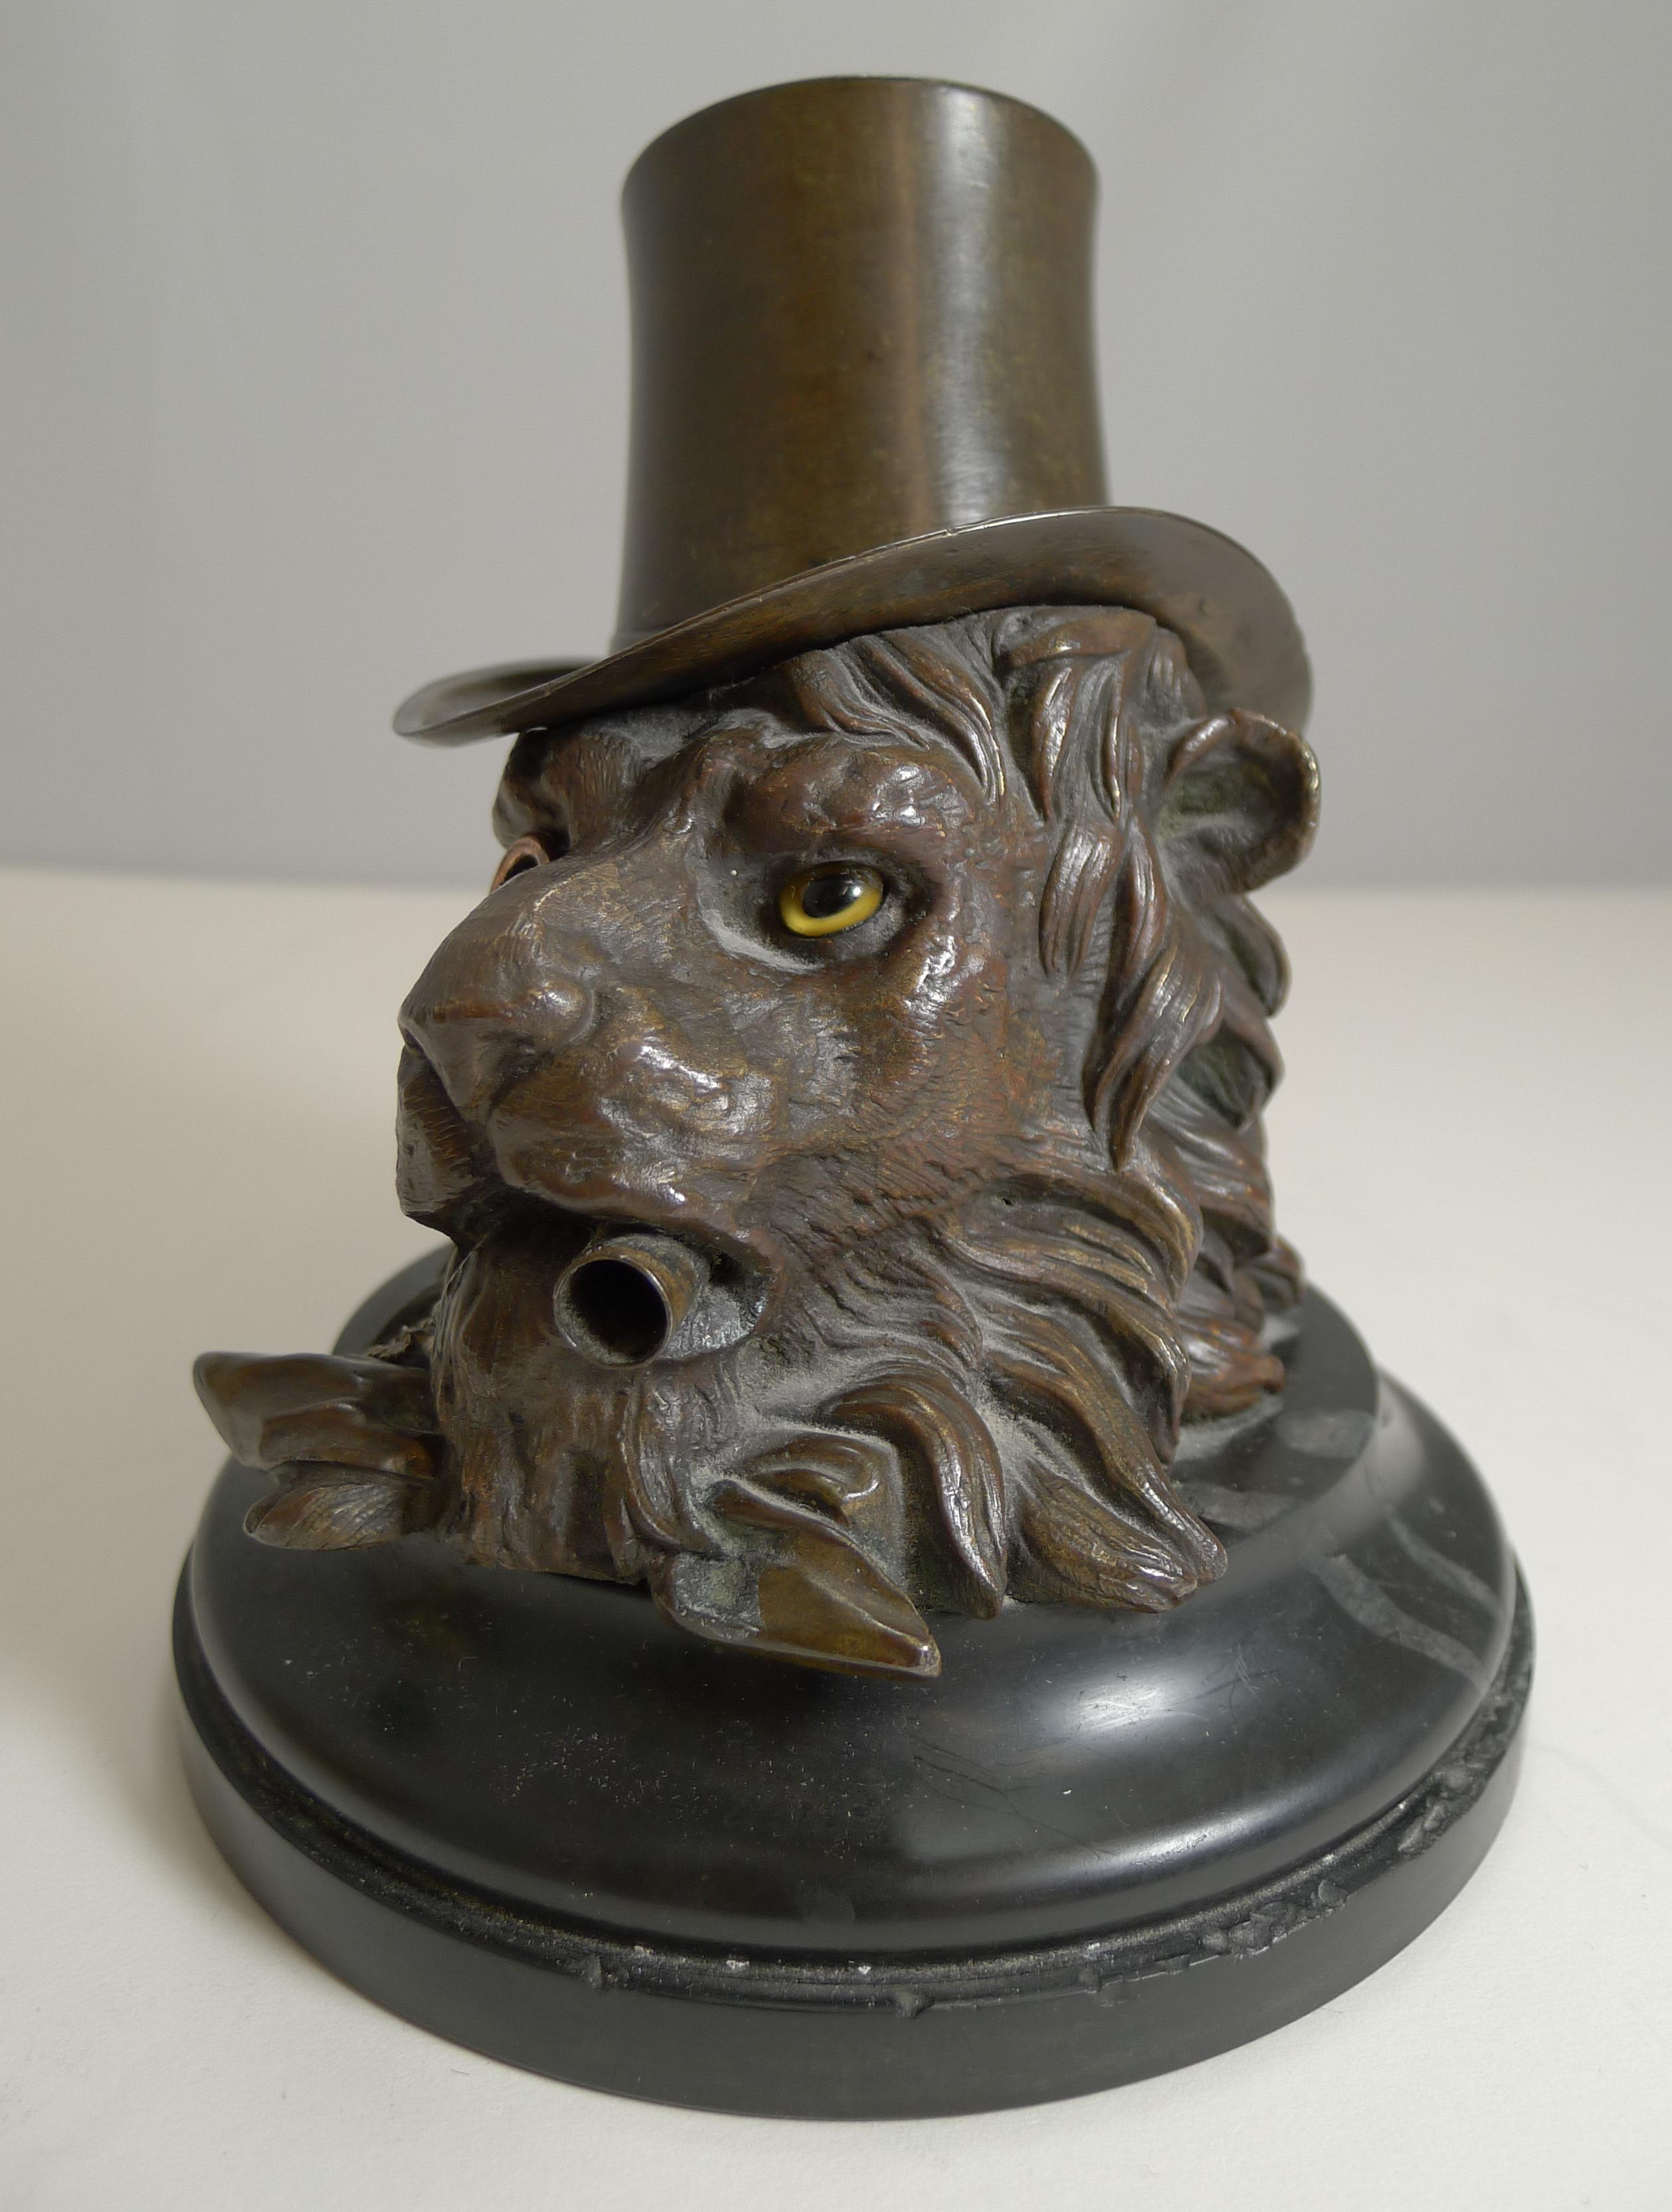 A truly magnificent and rare English Victorian bronze inkwell beautifully executed in the form of a very dapper and handsome Lion.

Standing on a black marble plinth, the handsome Lion wears a top hat and sports his monocle on a chain. Retaining